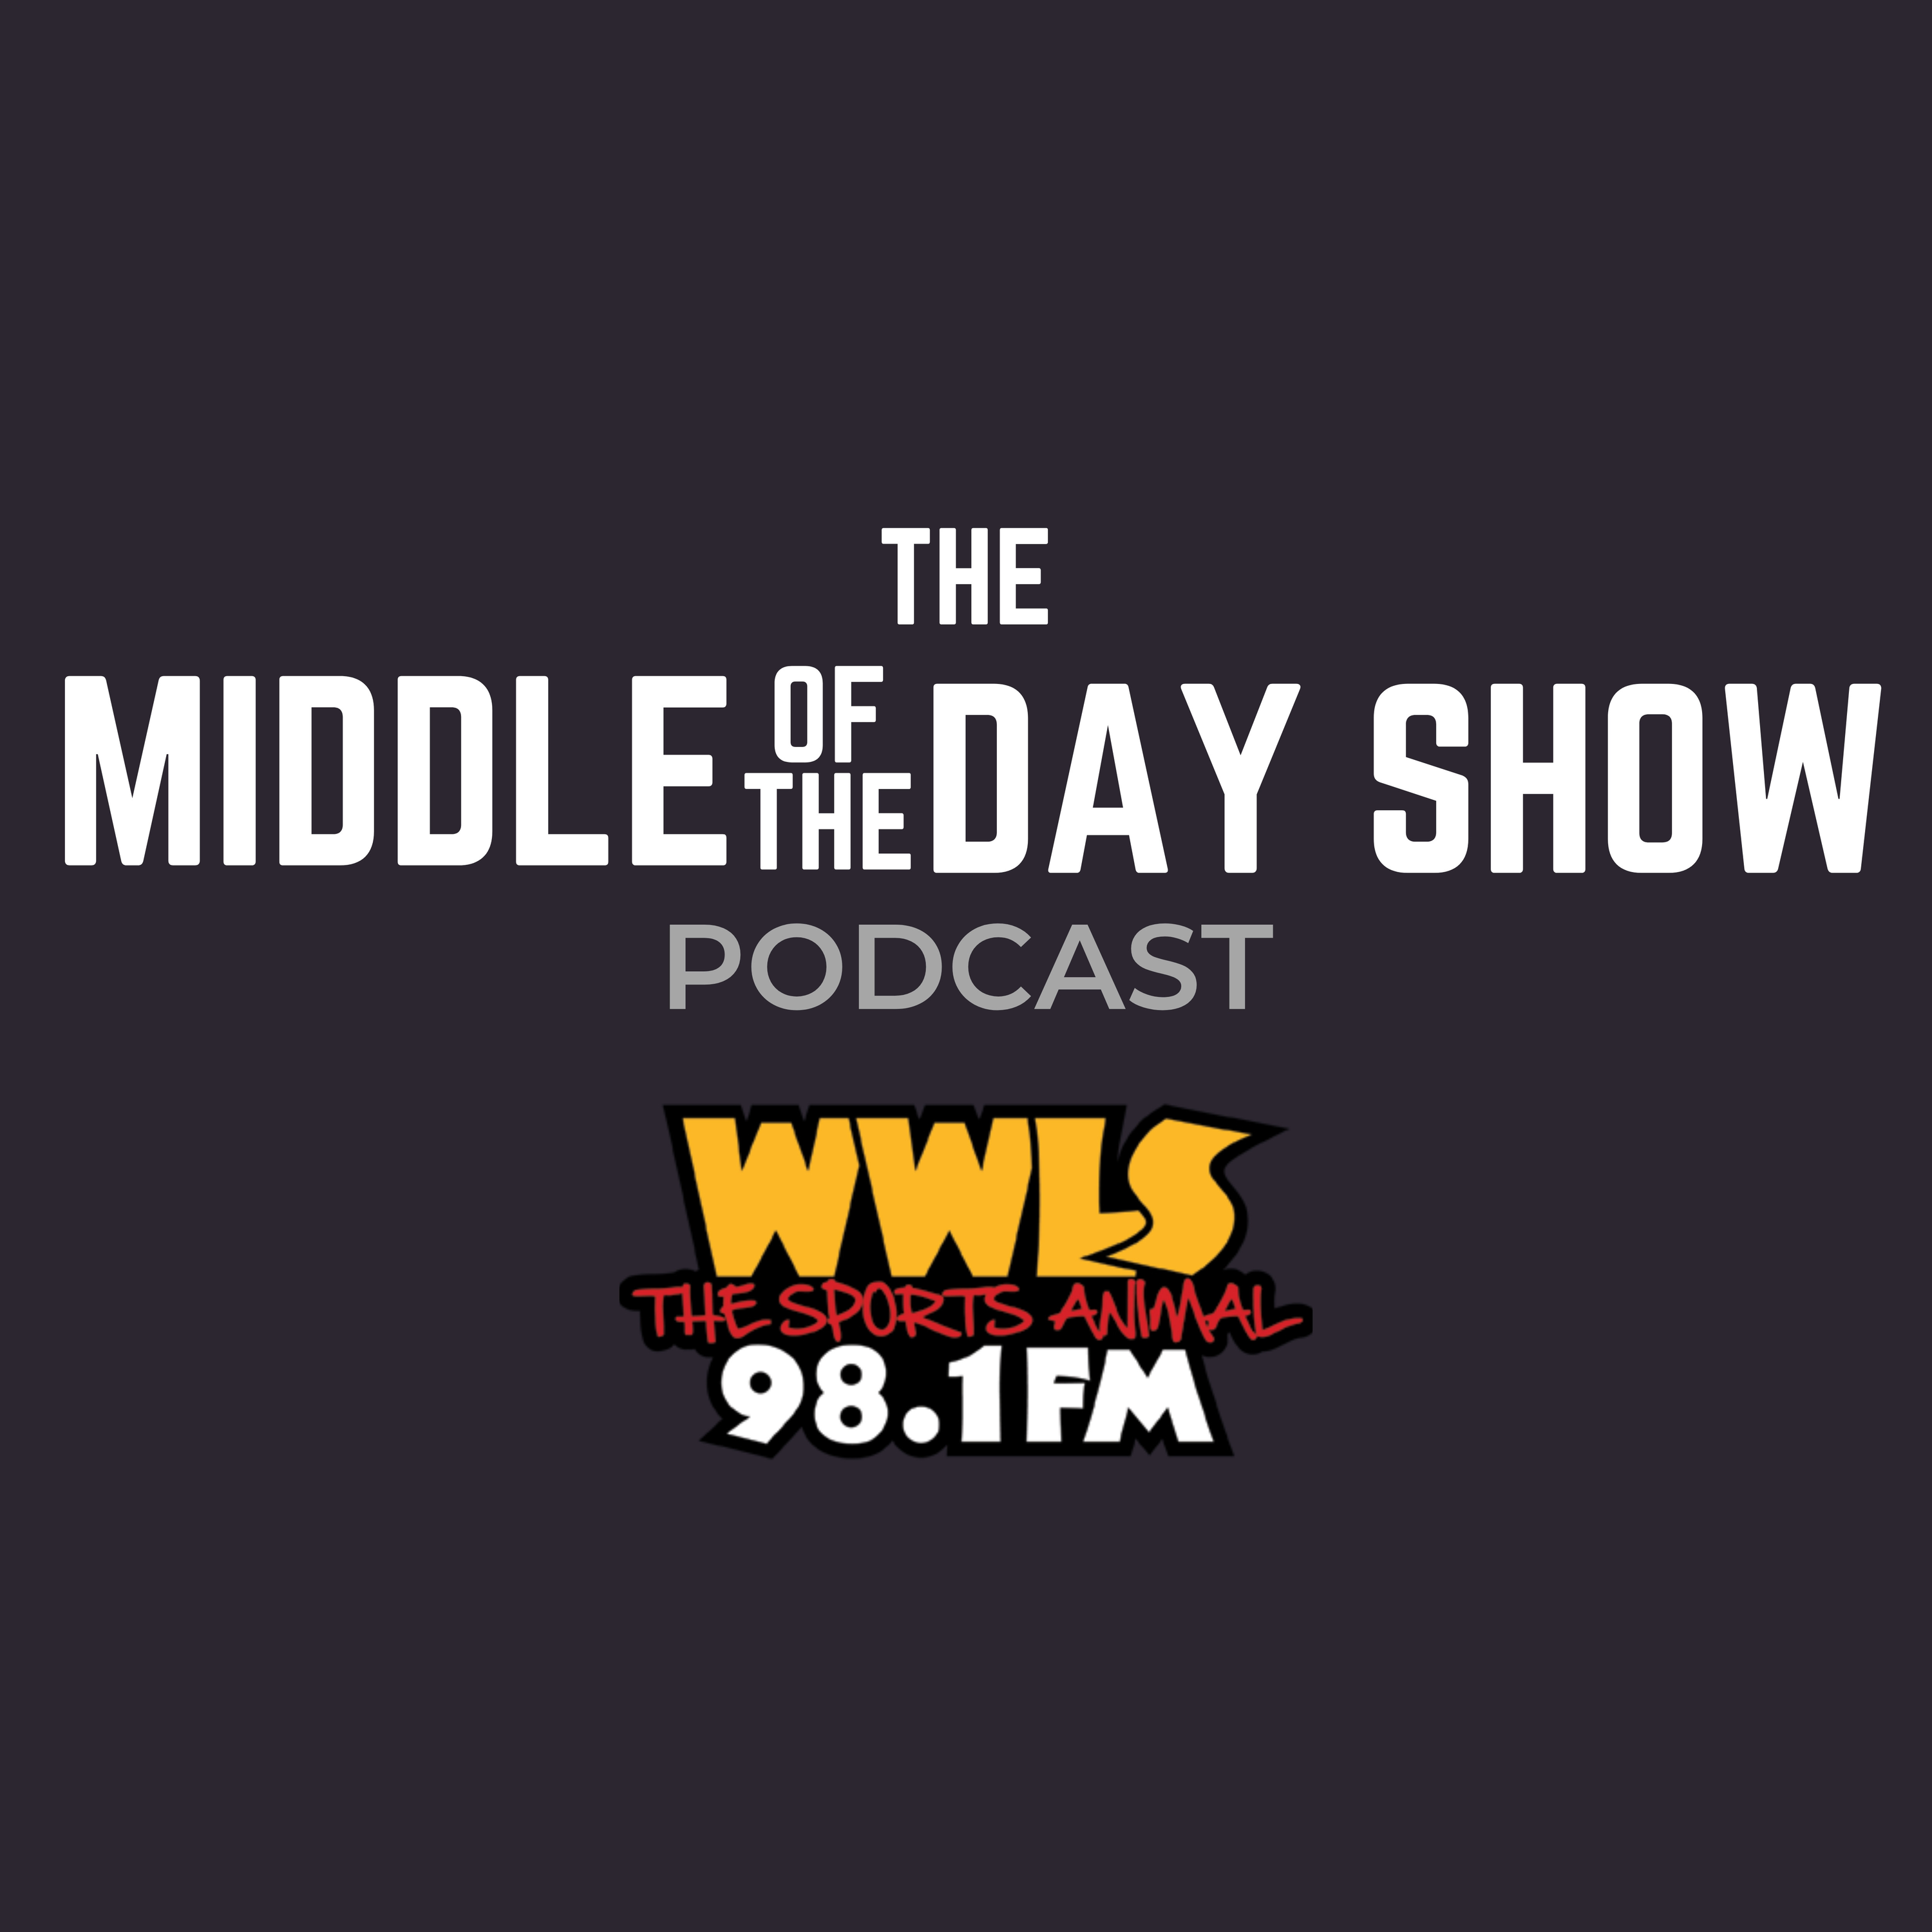 Middle of the Day Show w/ Brad Copeland from KATT